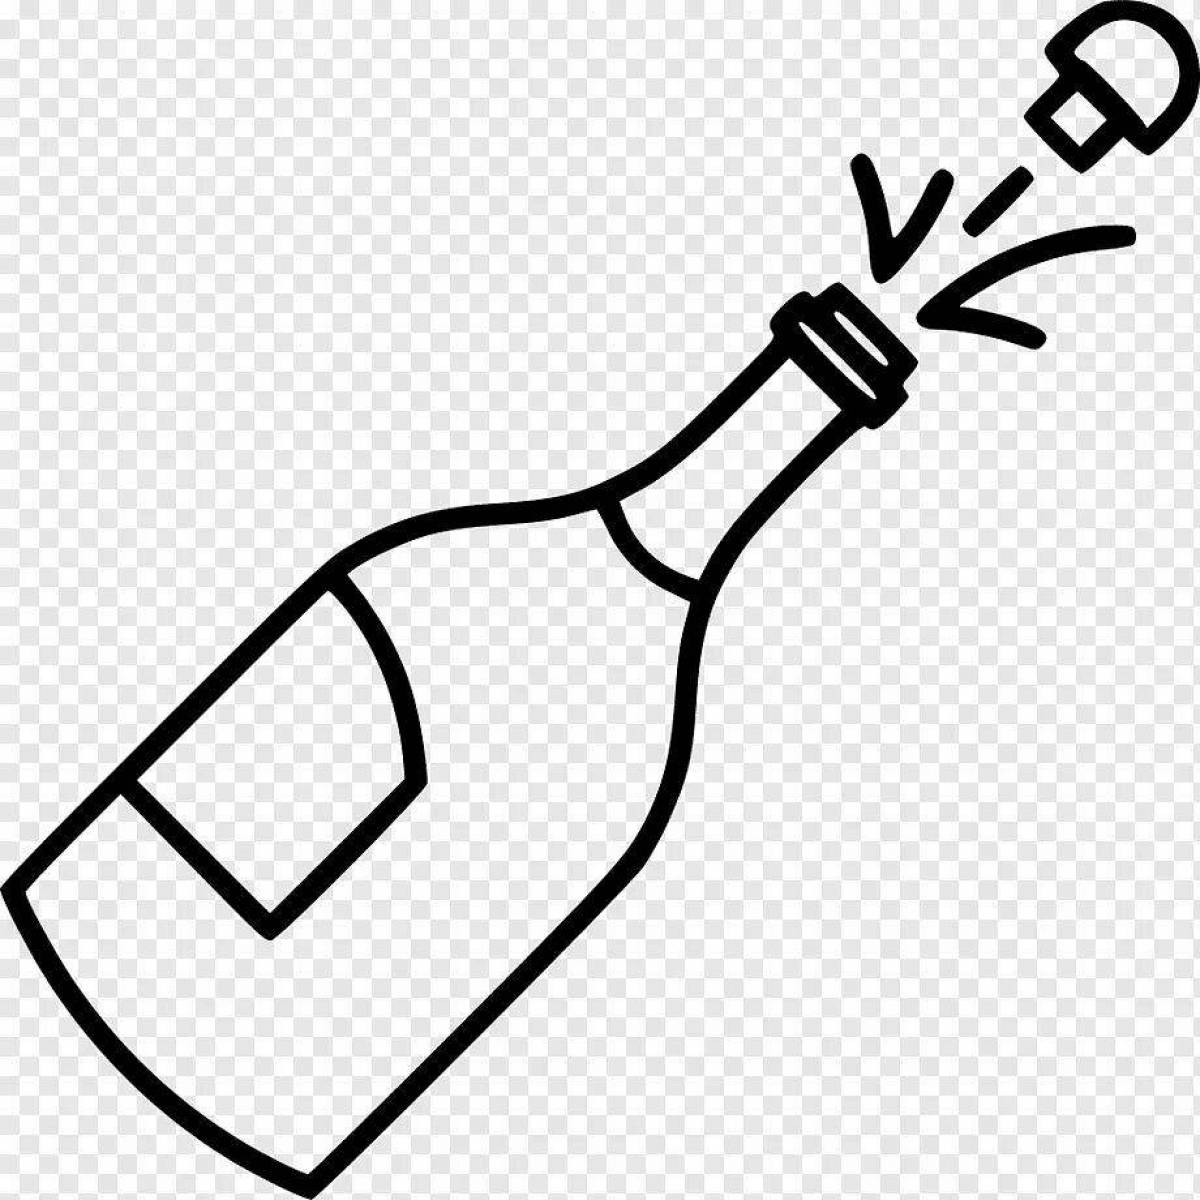 Coloring page happy bottle of wine